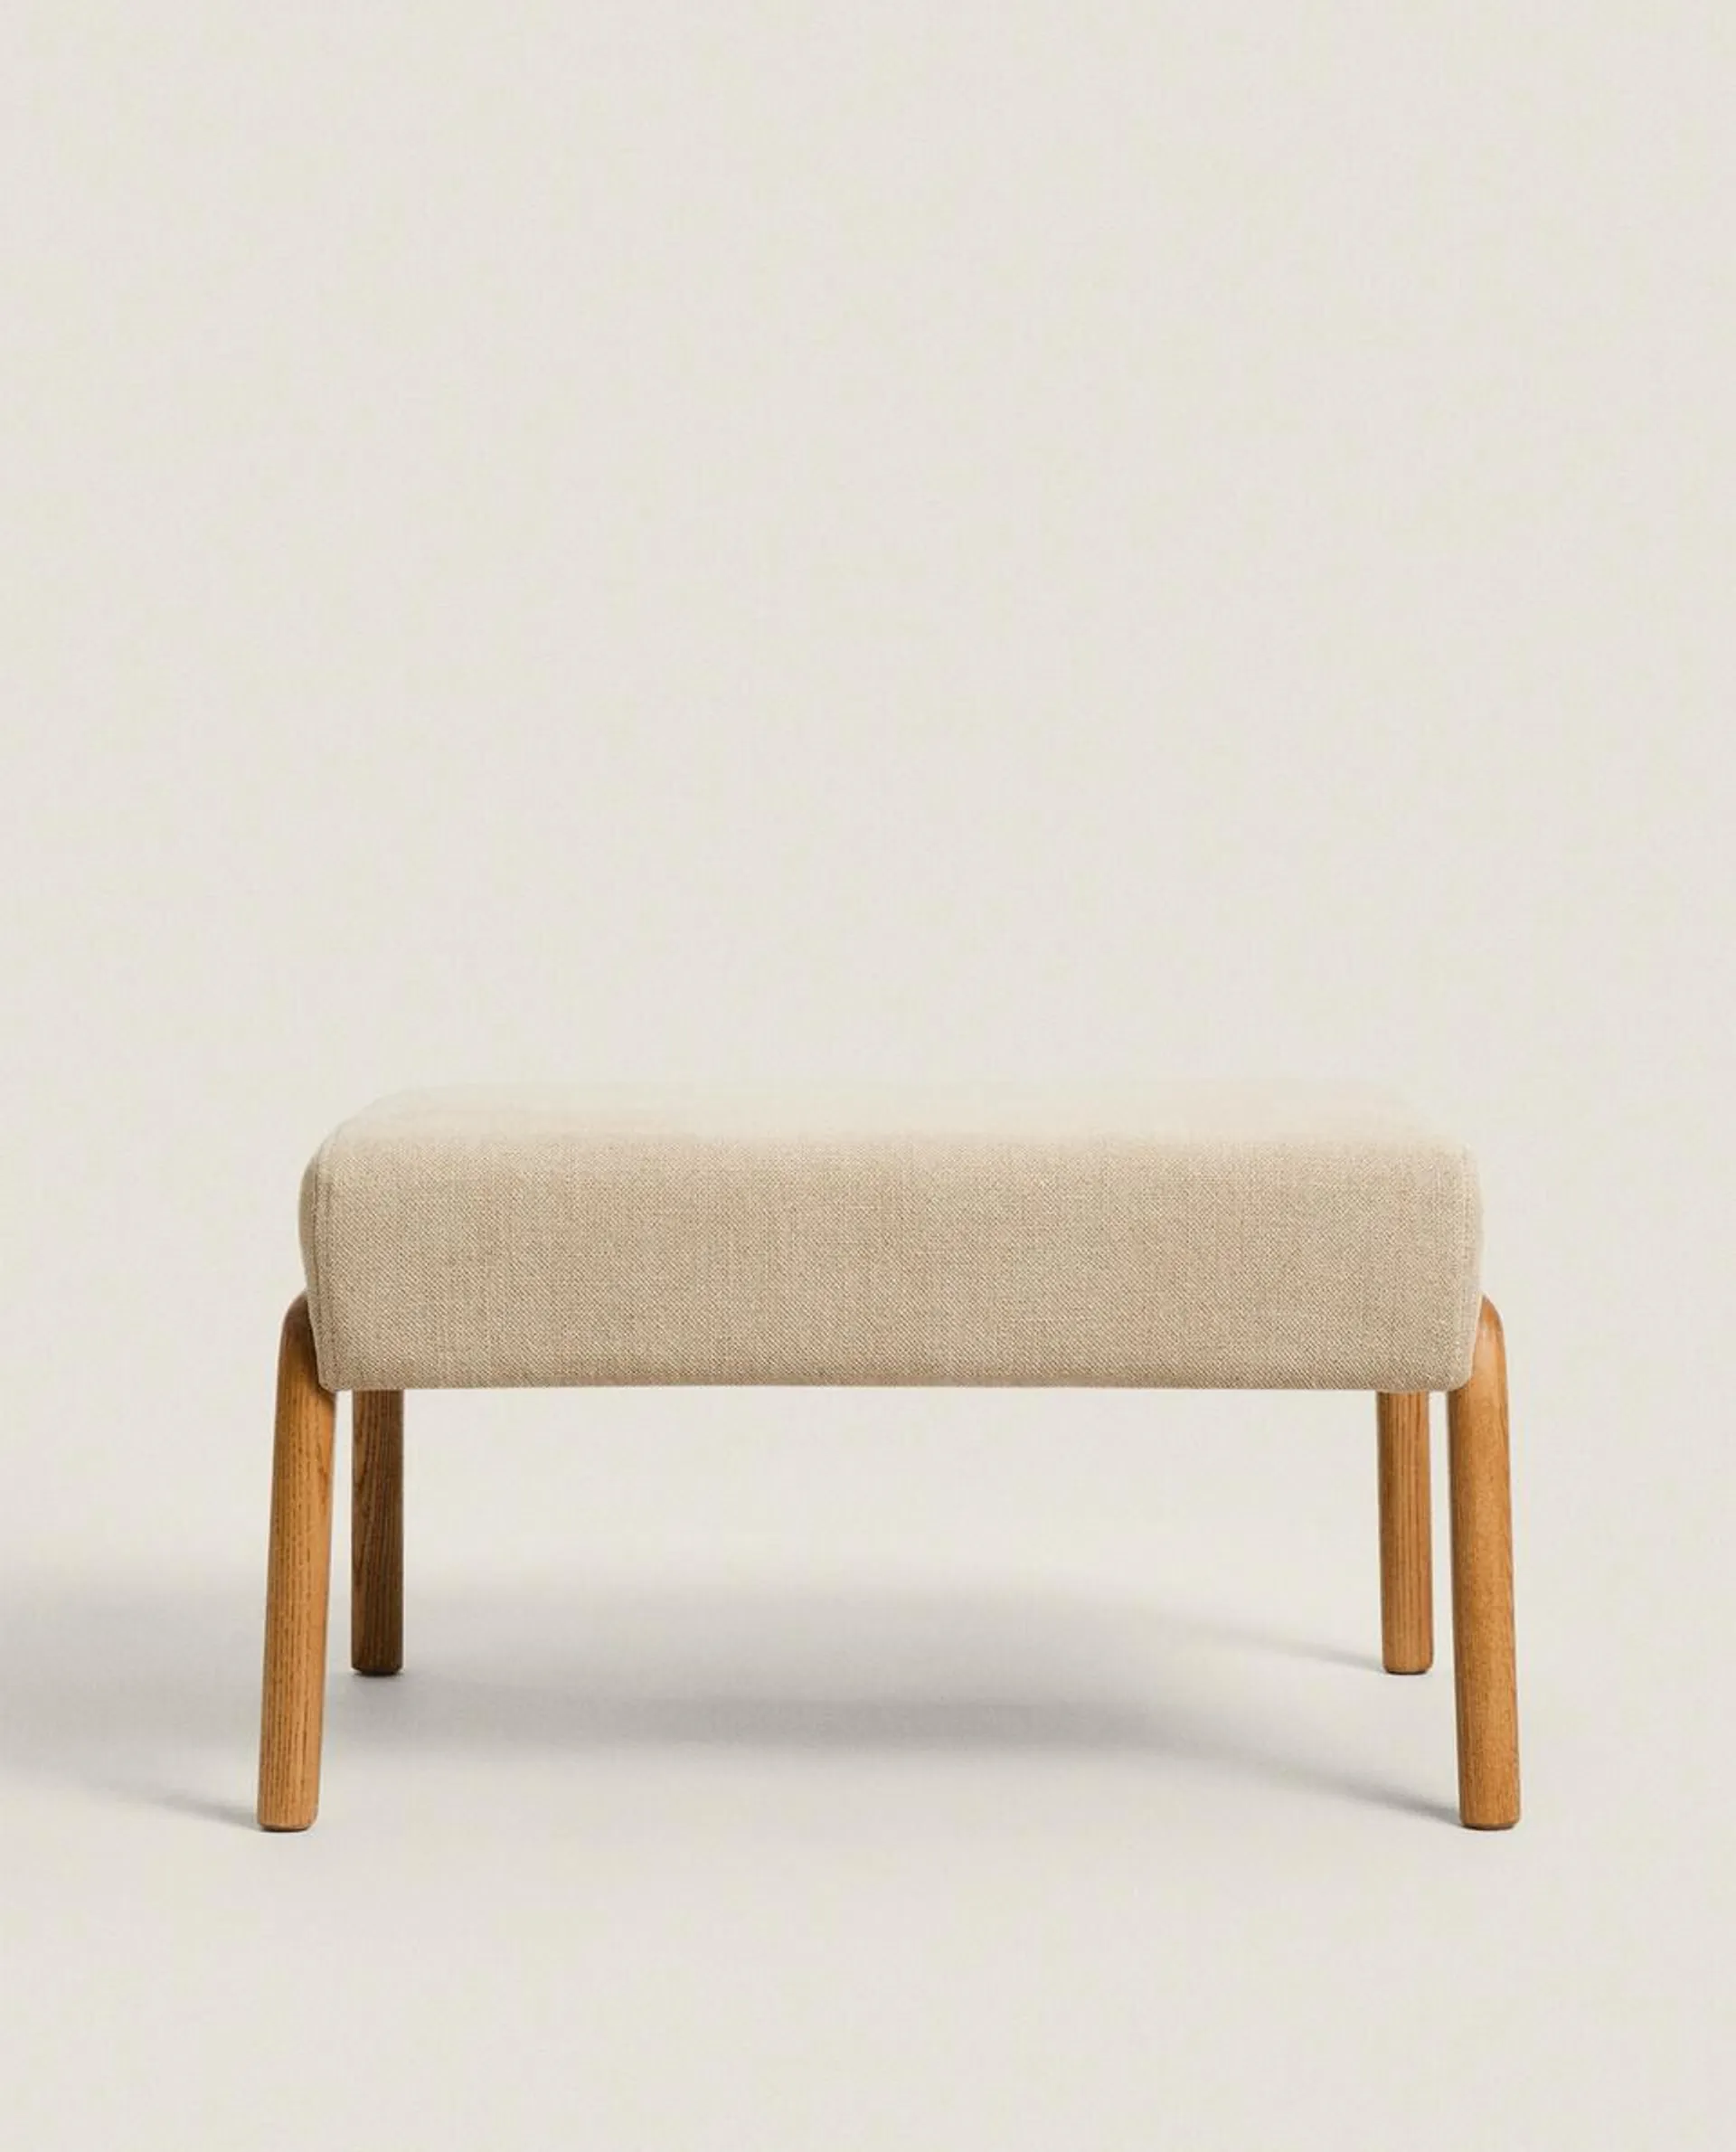 ASH WOOD AND LINEN FOOTREST STOOL